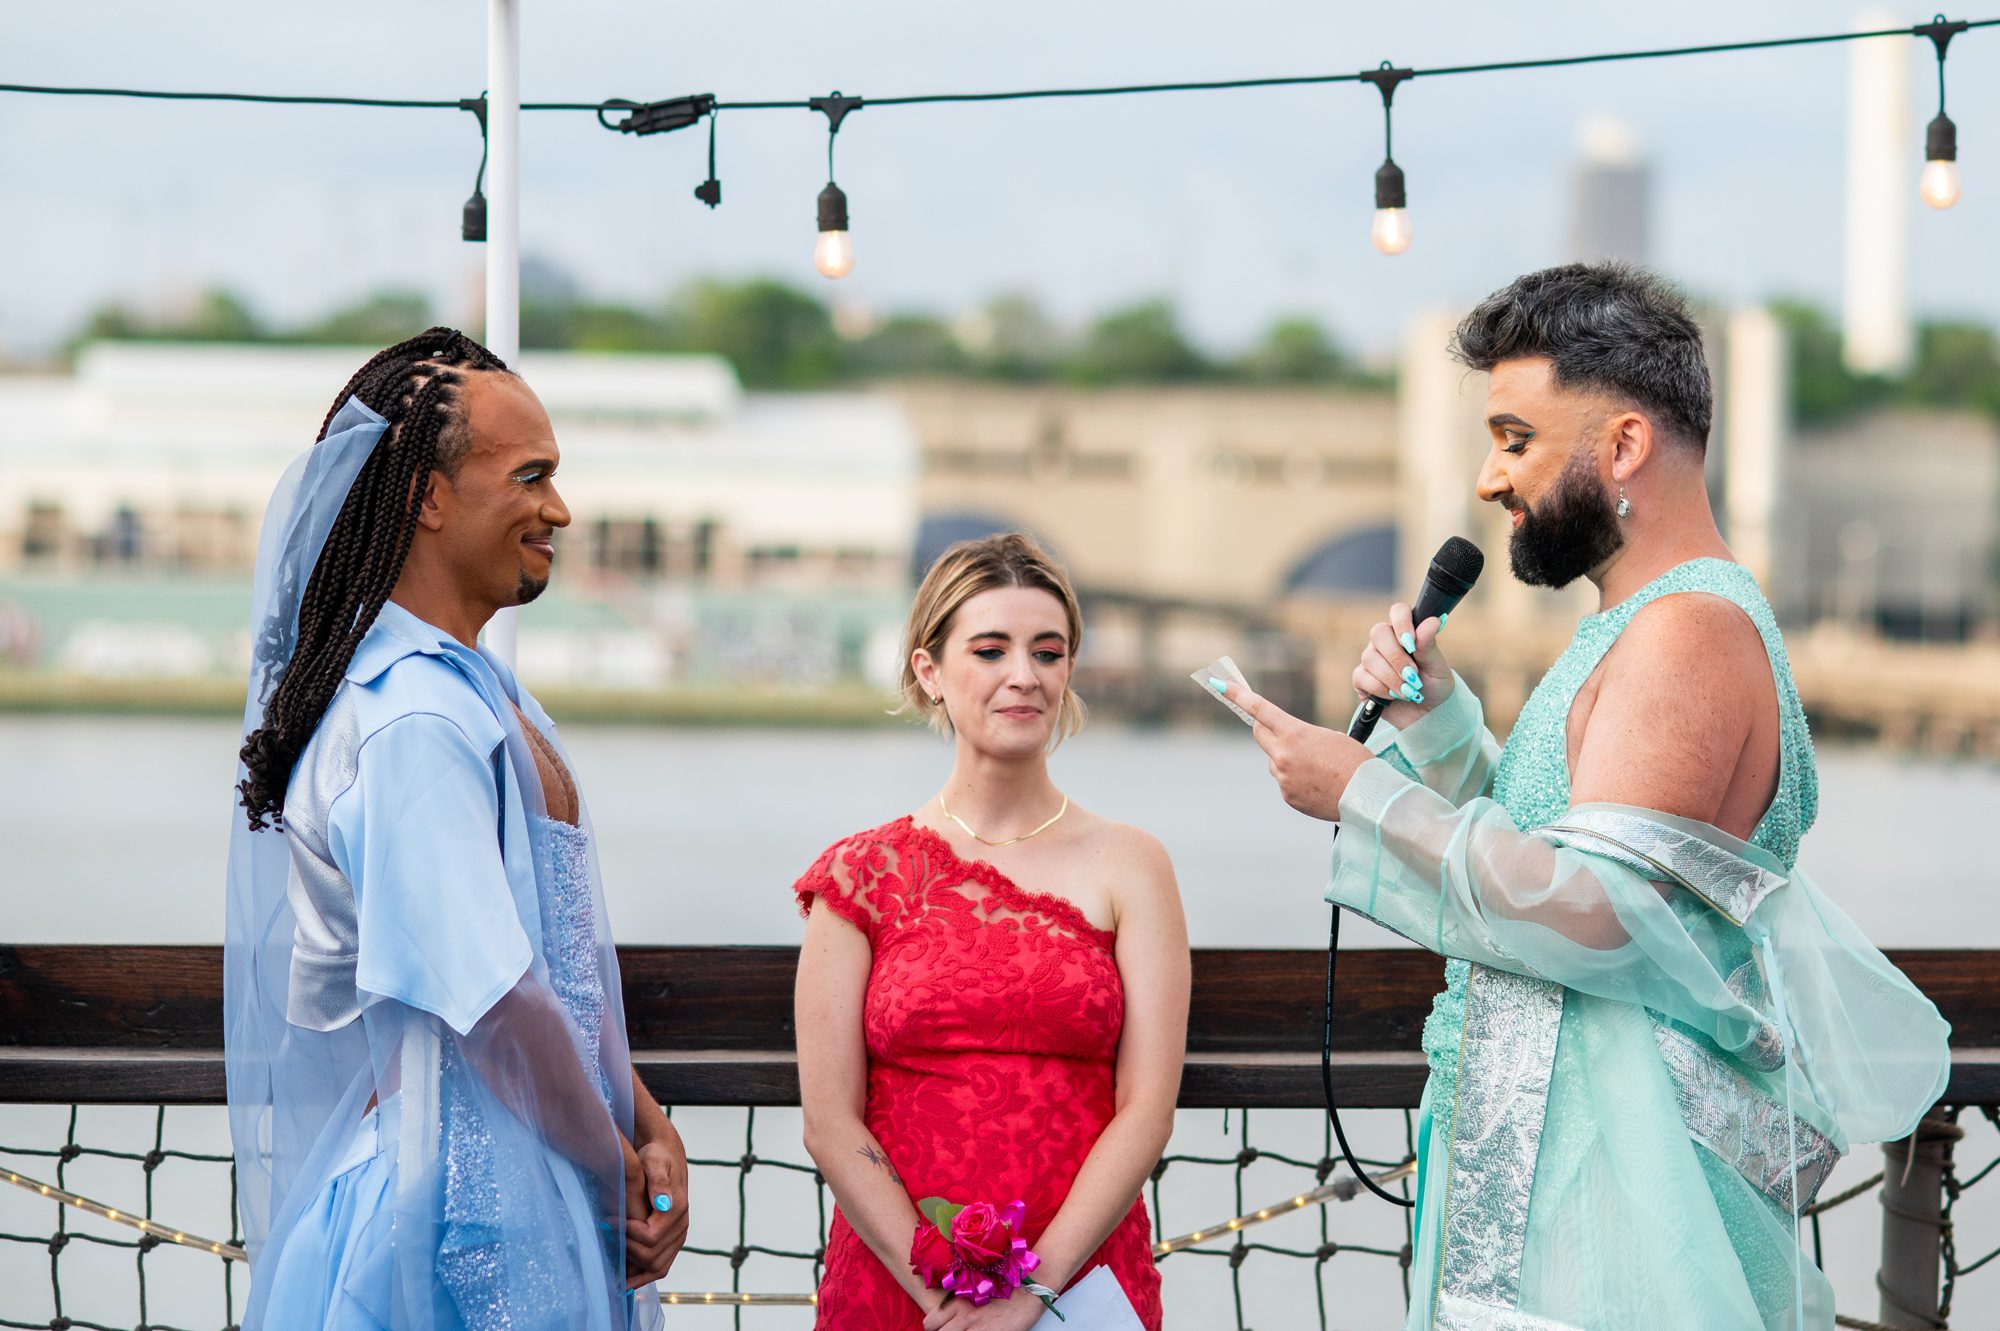 Exchanging vows during a wedding ceremony in NYC 